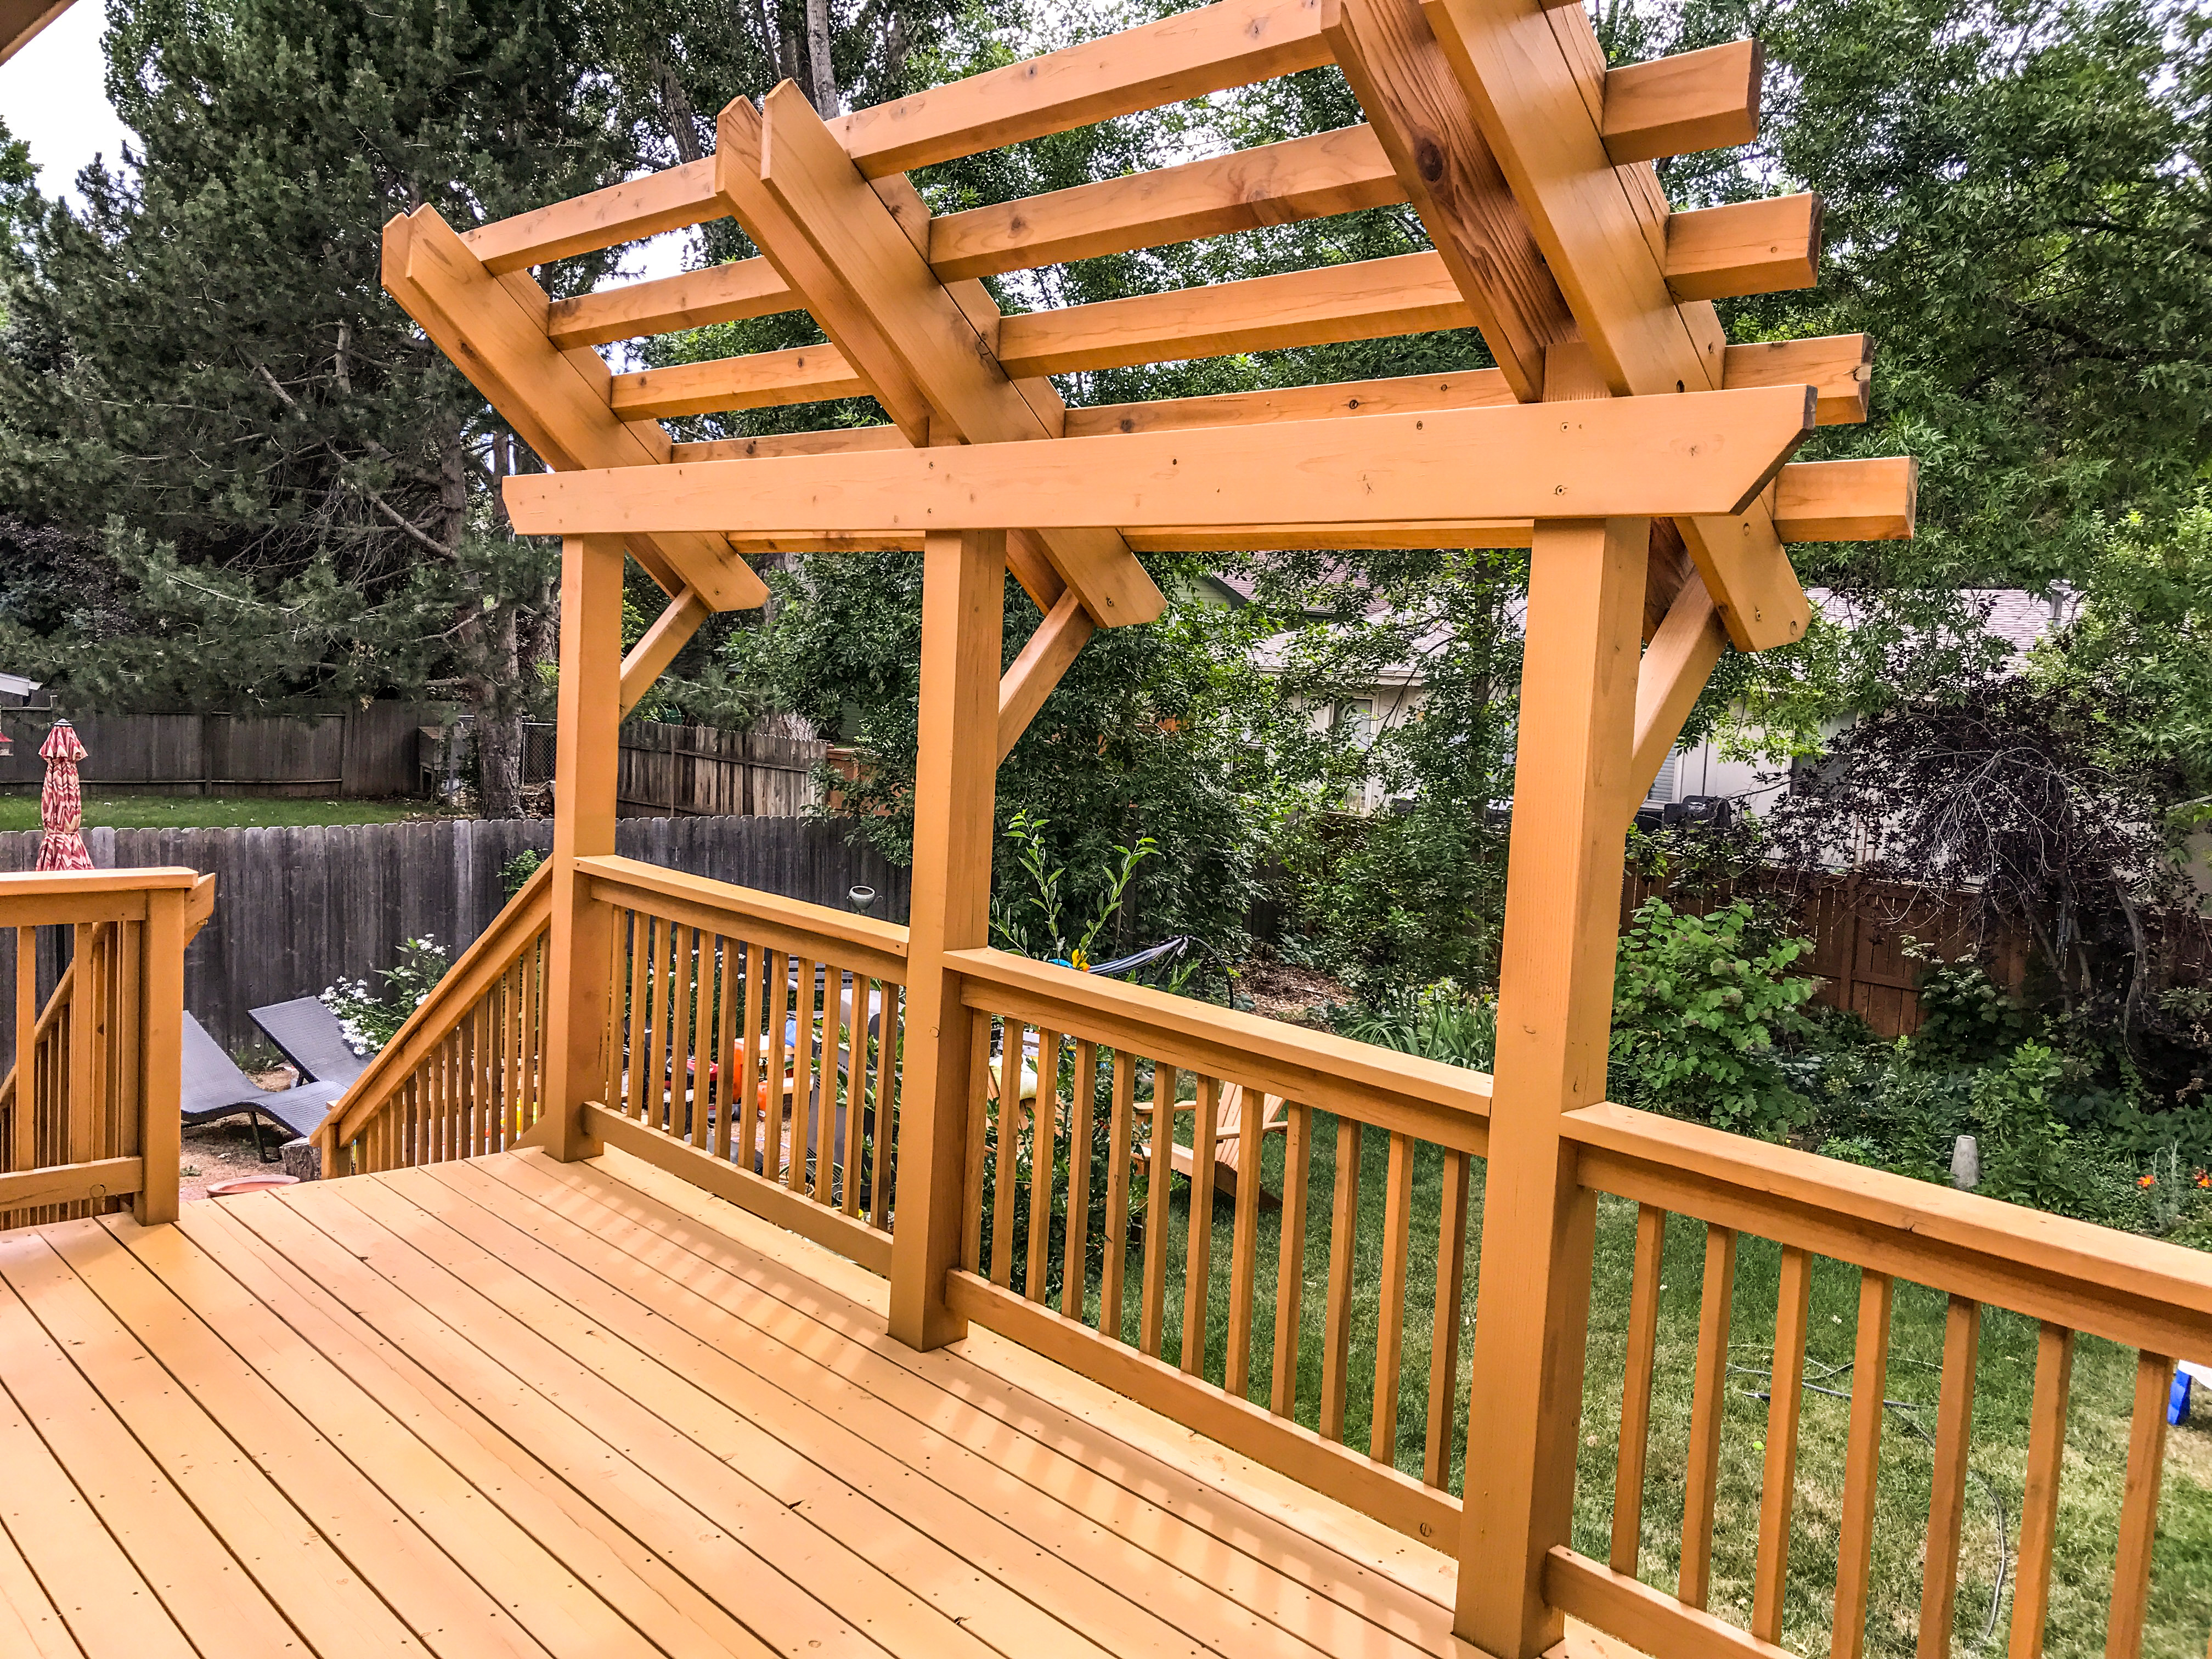 Staining Fences & Decks In Your Area